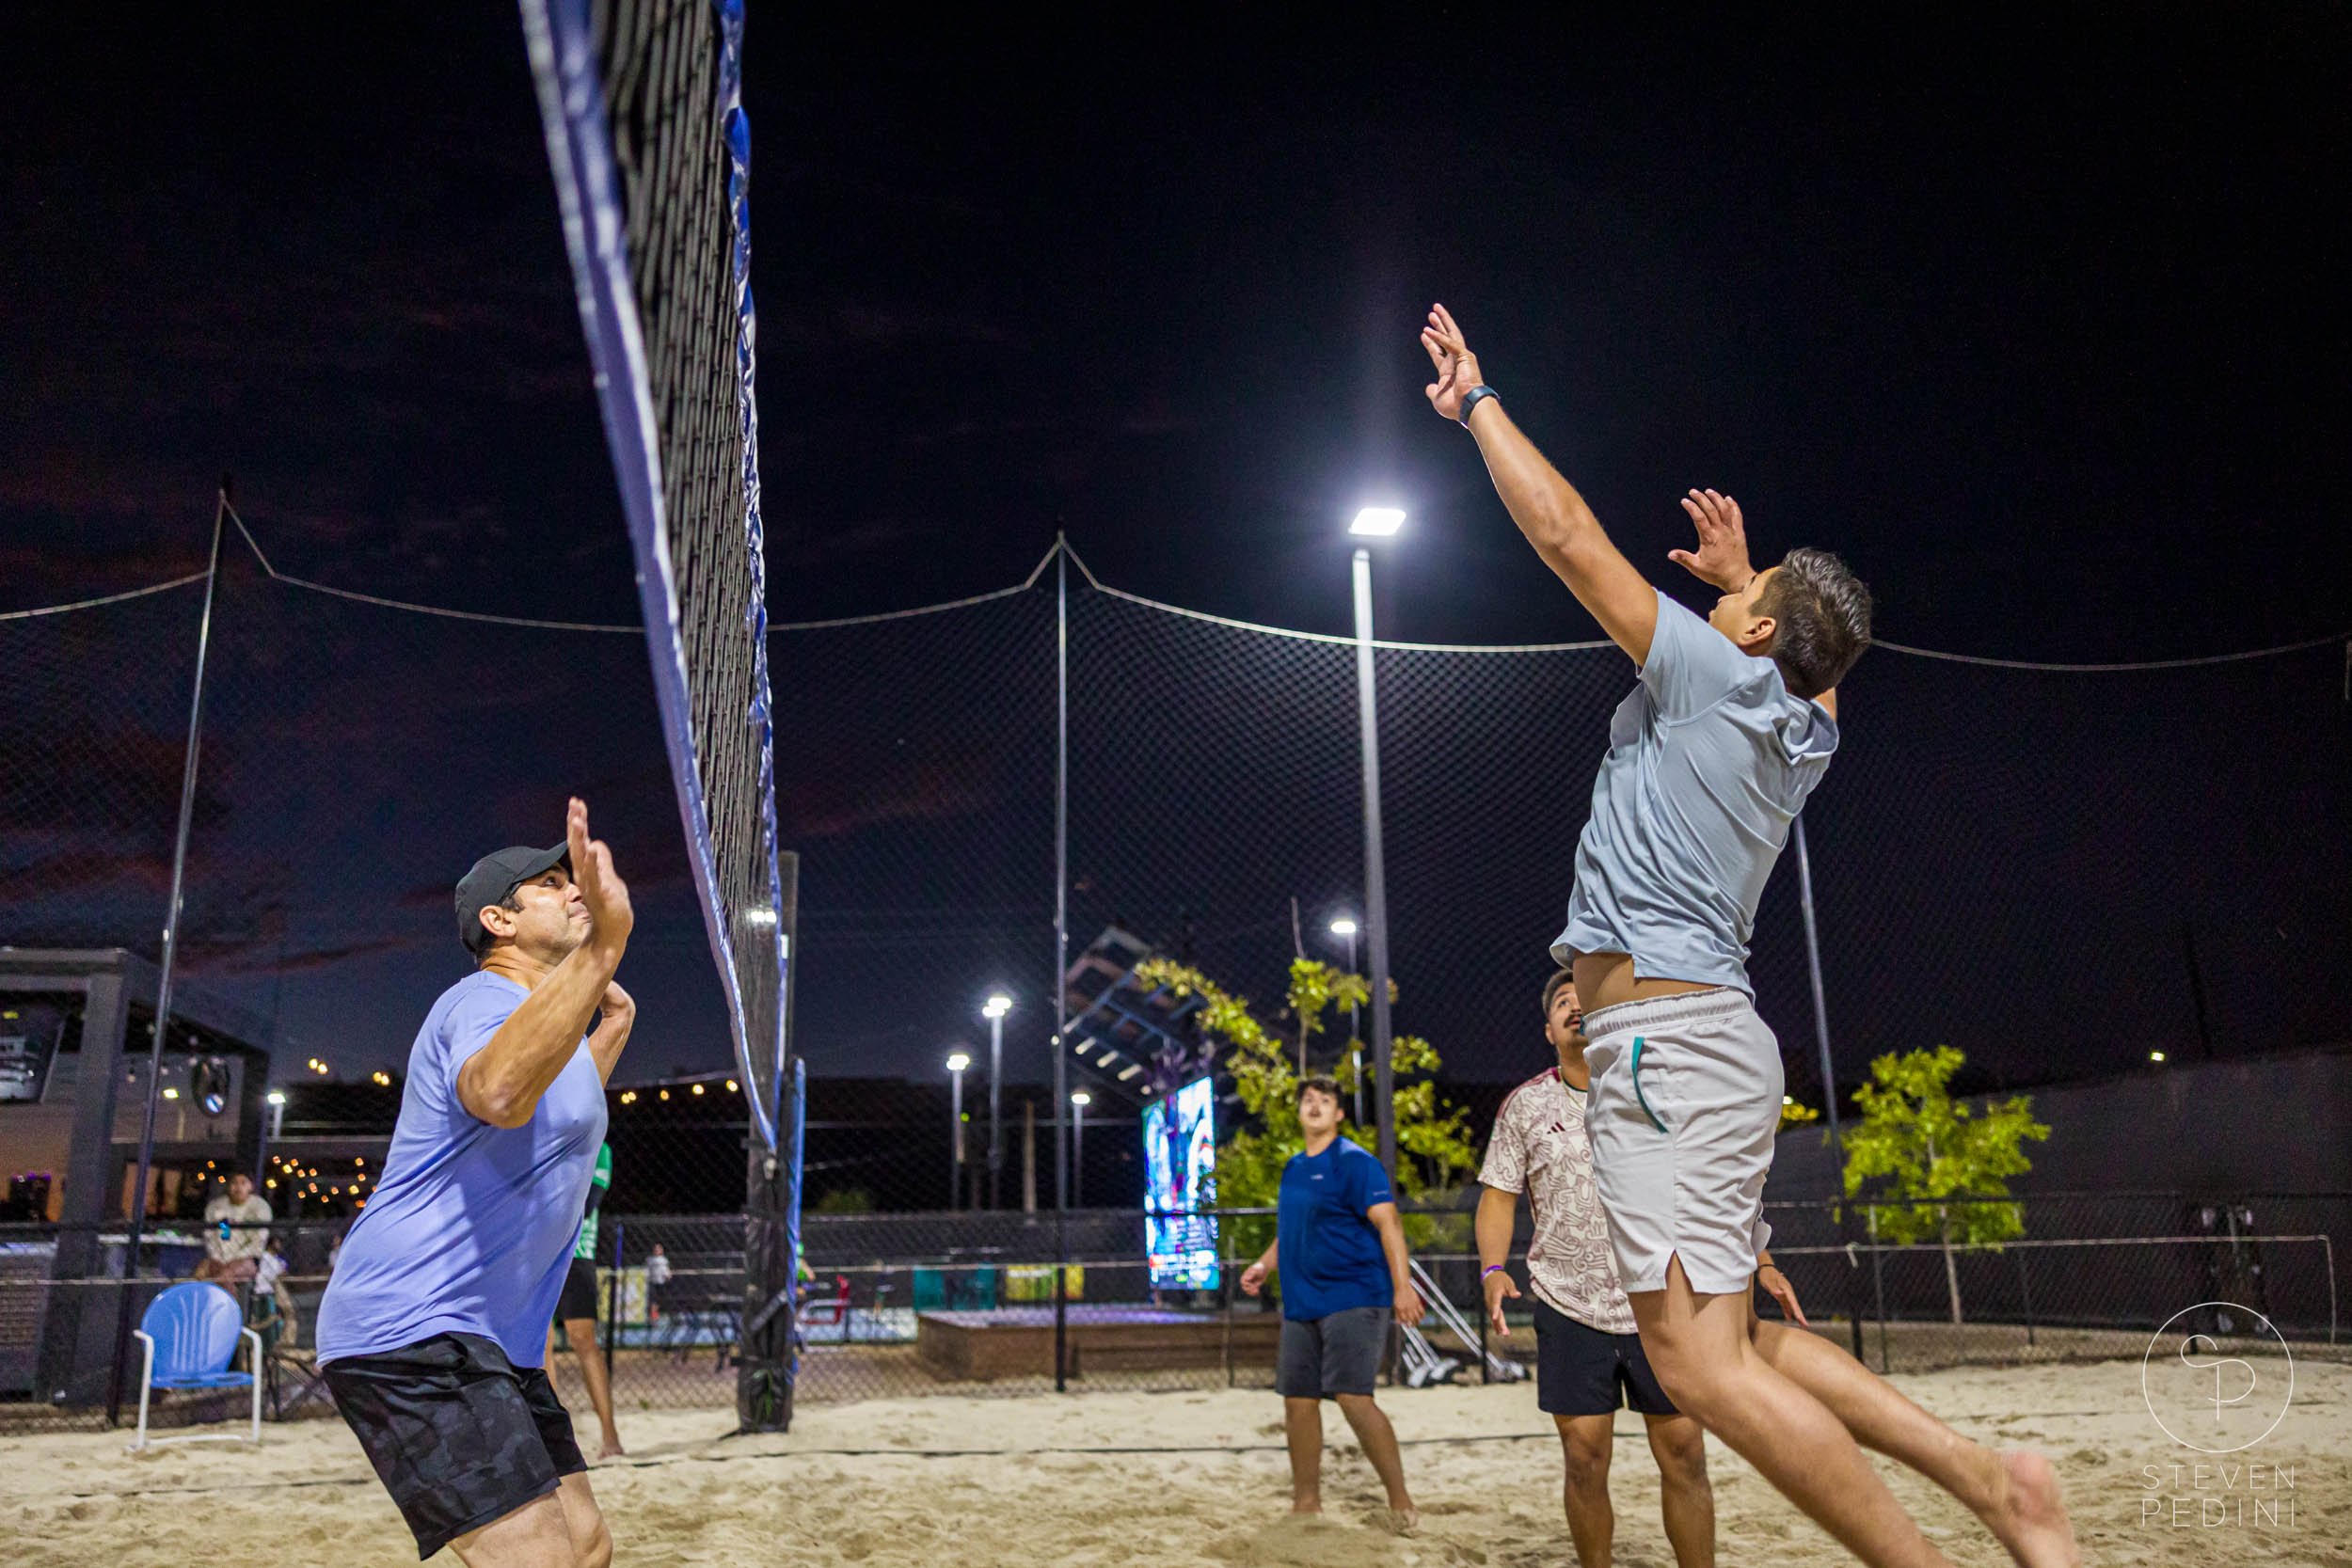 Steven Pedini Photography - Bumpy Pickle - Sand Volleyball - Houston TX - World Cup of Volleyball - 00373.jpg